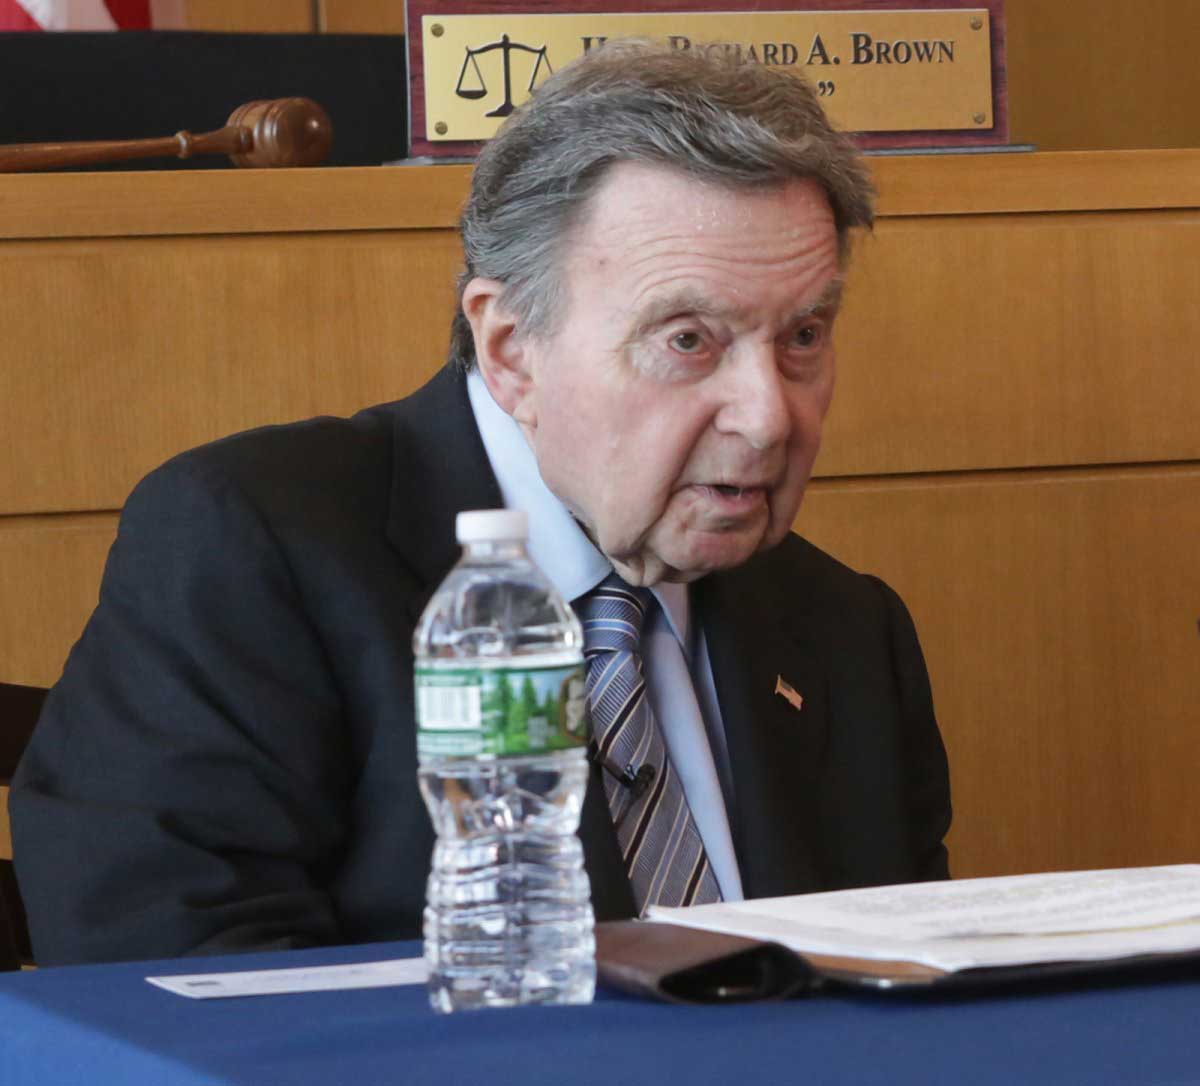 Queens District Attorney Richard Brown won’t seek re-election after 27 years in office